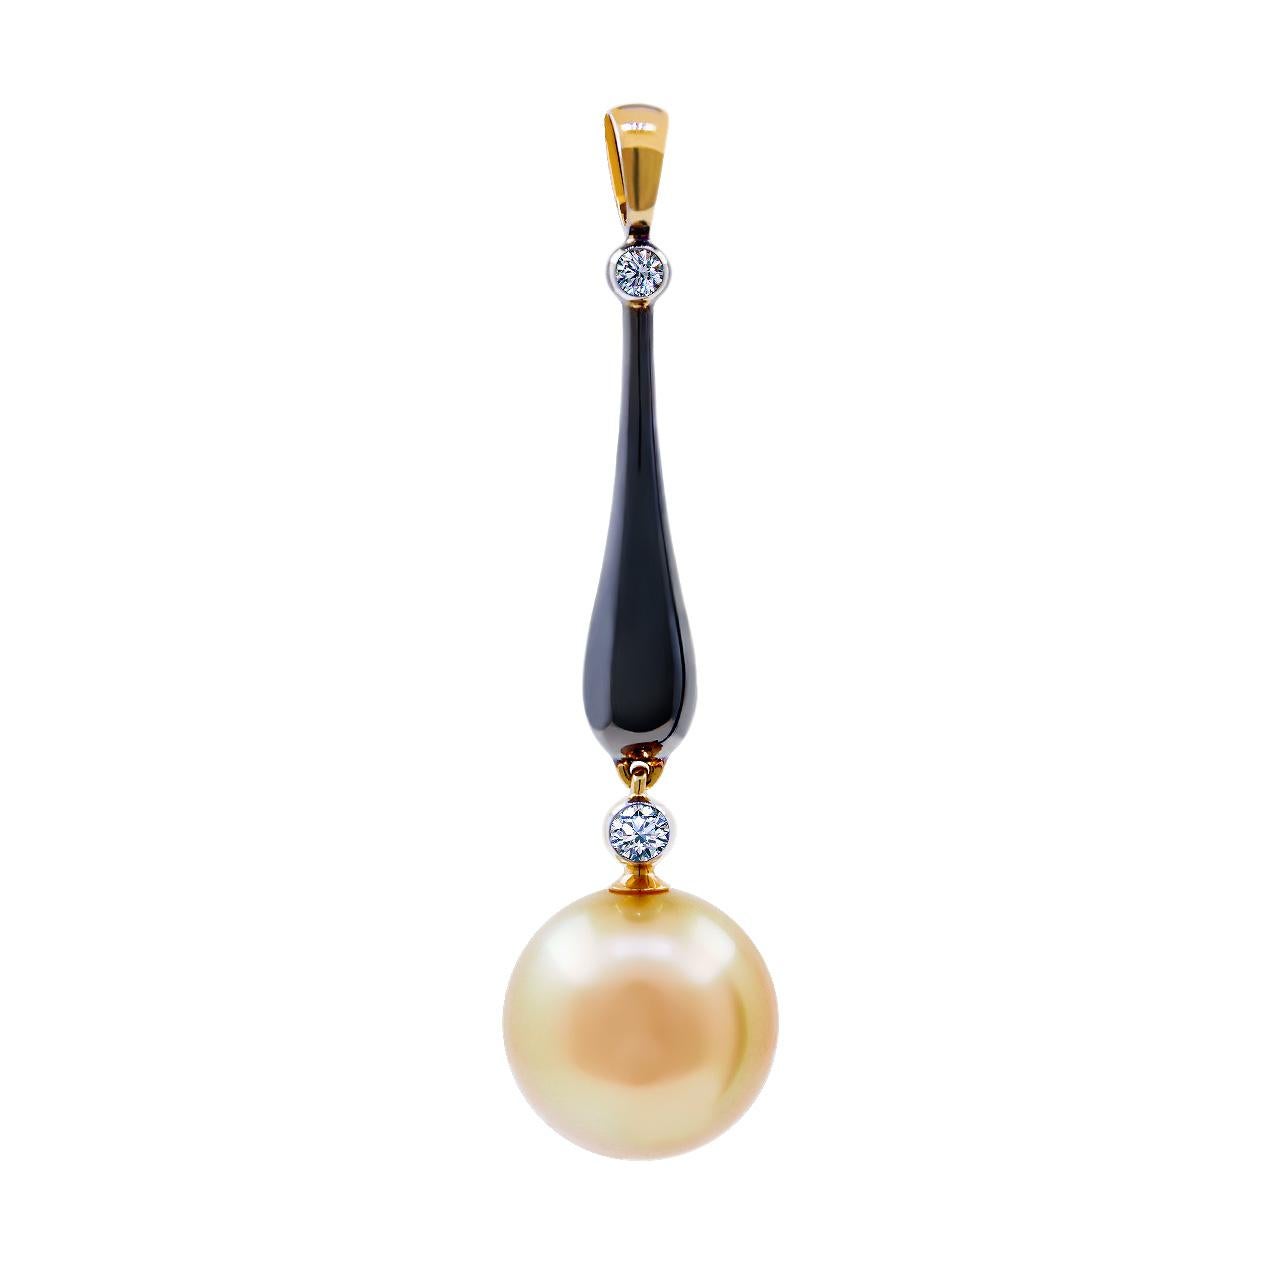 - 2 Round Diamonds – 0.09 ct, G/VVS1-VVS2
- 12 mm Golden South Sea Pearl
- 18K Yellow Gold 
- Weight: 4.81 g
This pendant from the Pearl dreams collection features a lustrous Golden South Sea pearl of 12 mm diameter. The design is complete with two